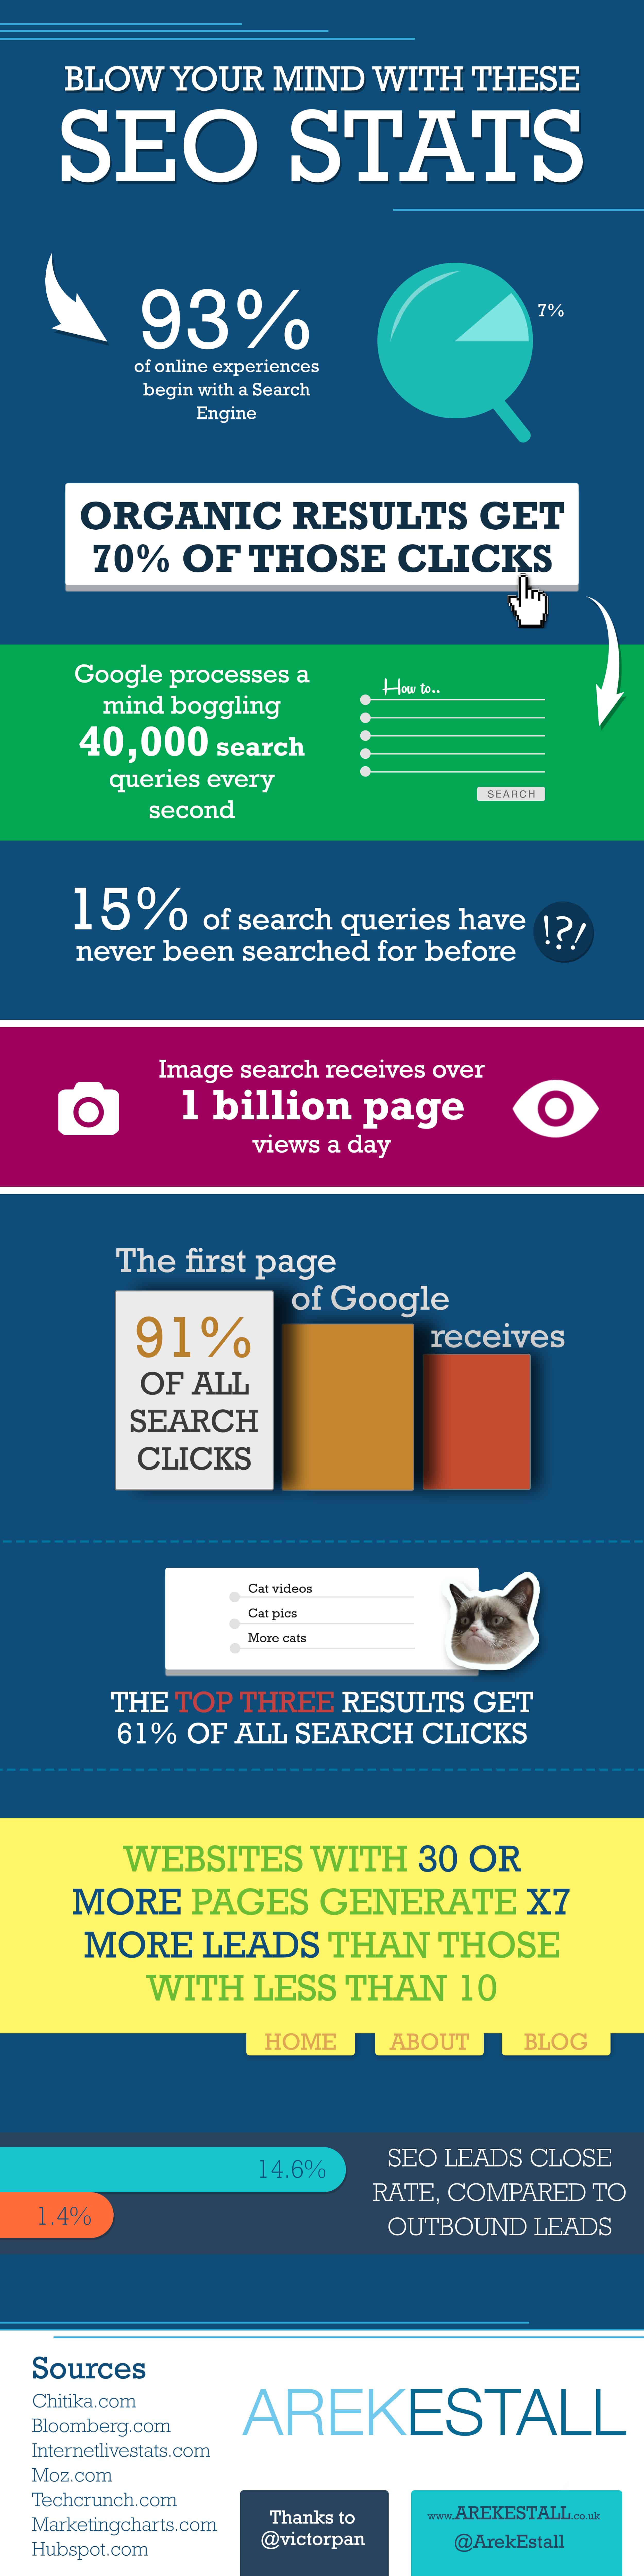 infographie-SEO-statistiques